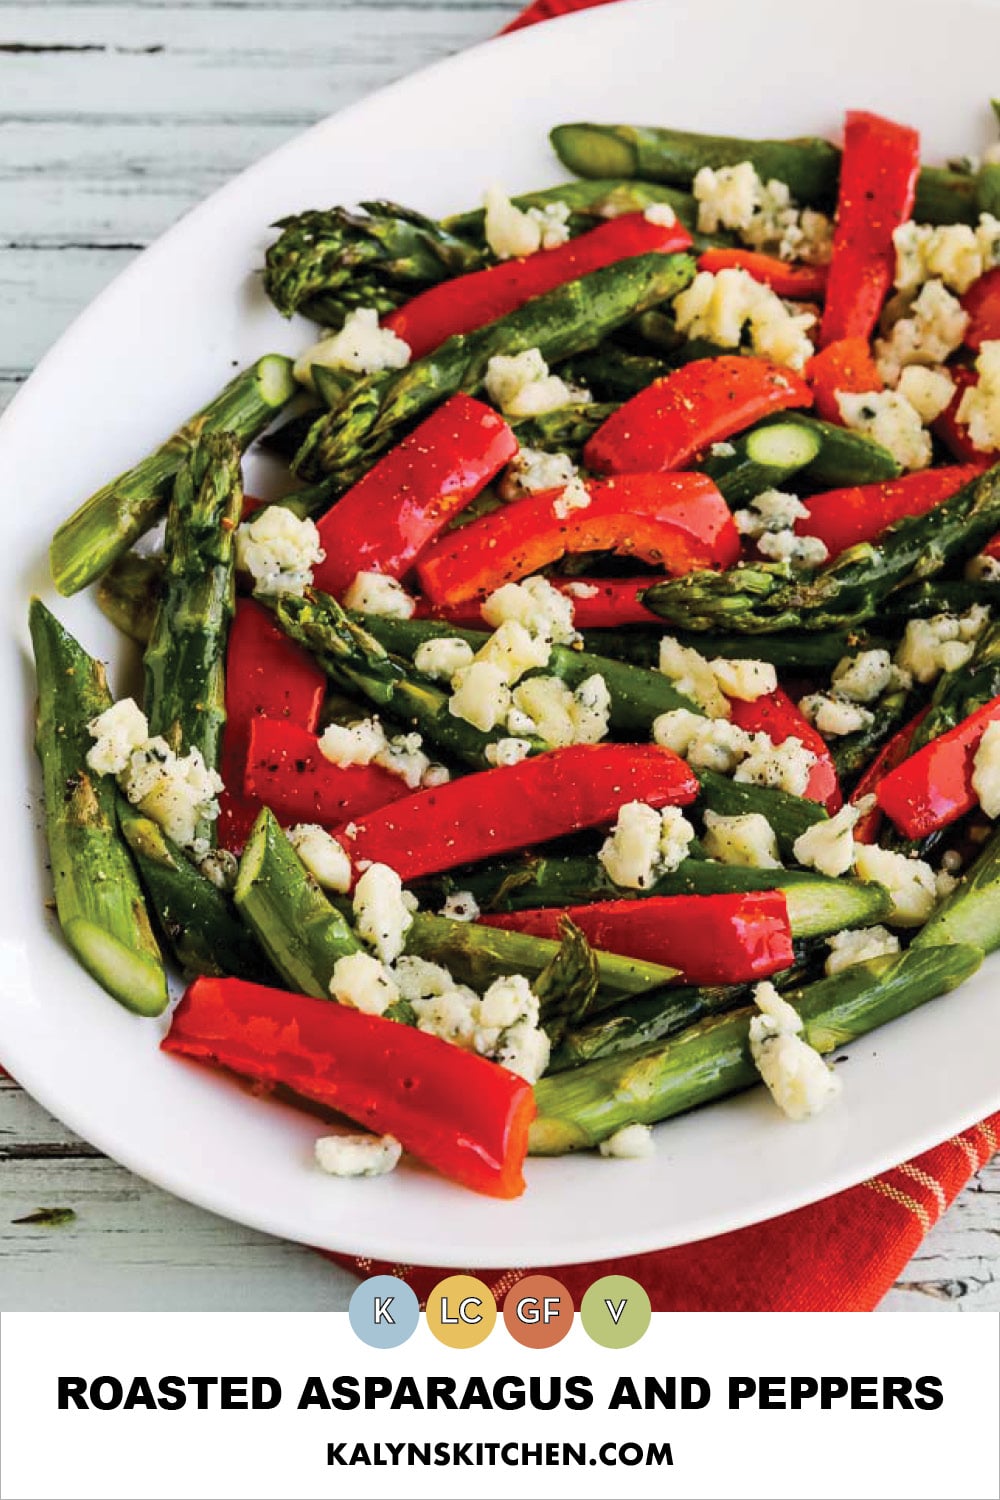 Pinterest image of Roasted Asparagus and Peppers